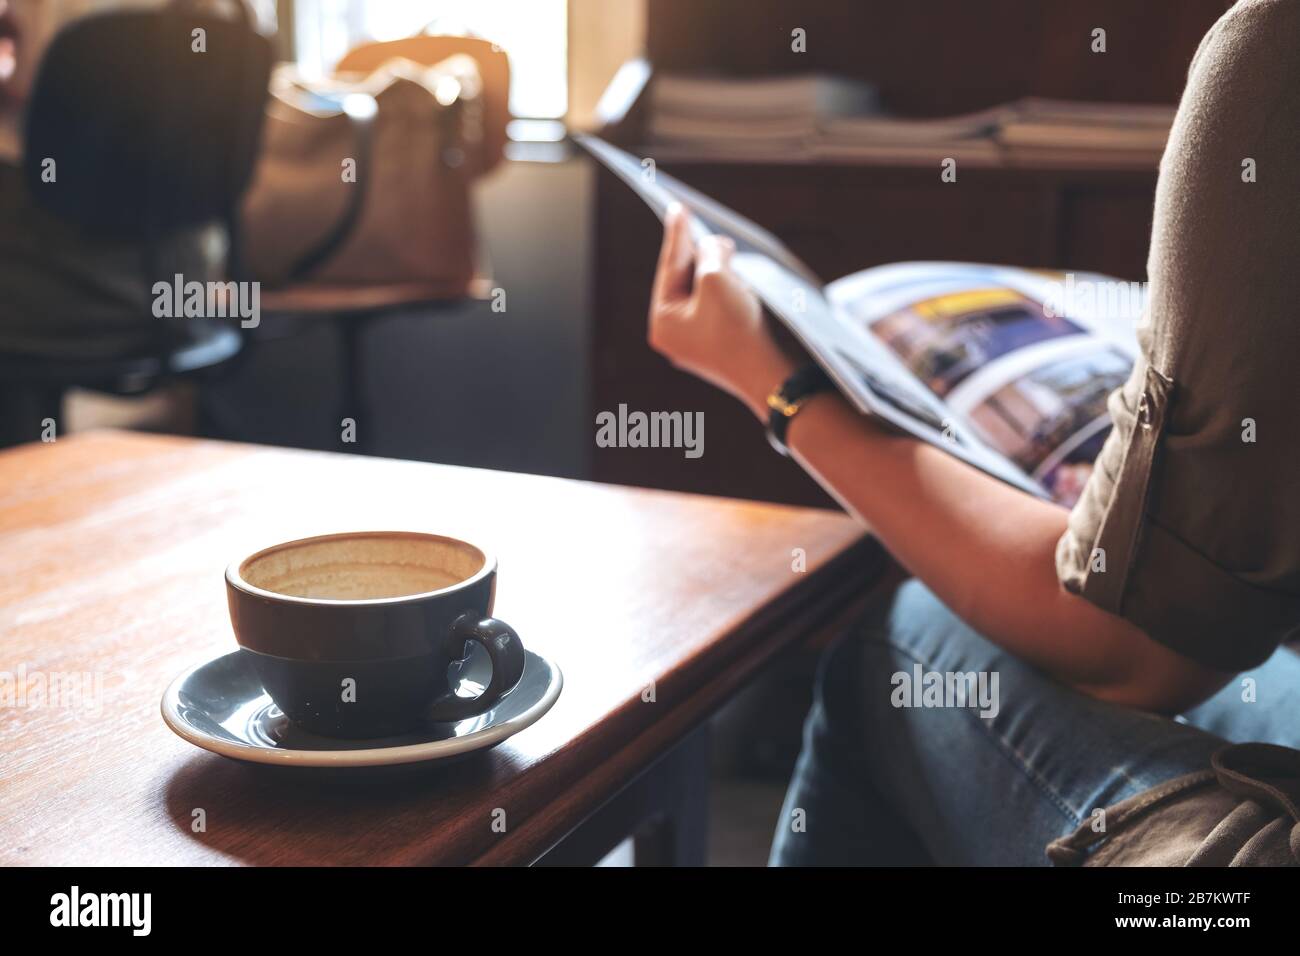 Closeup image of a woman reading a book with coffee cup on wooden table in modern cafe Stock Photo